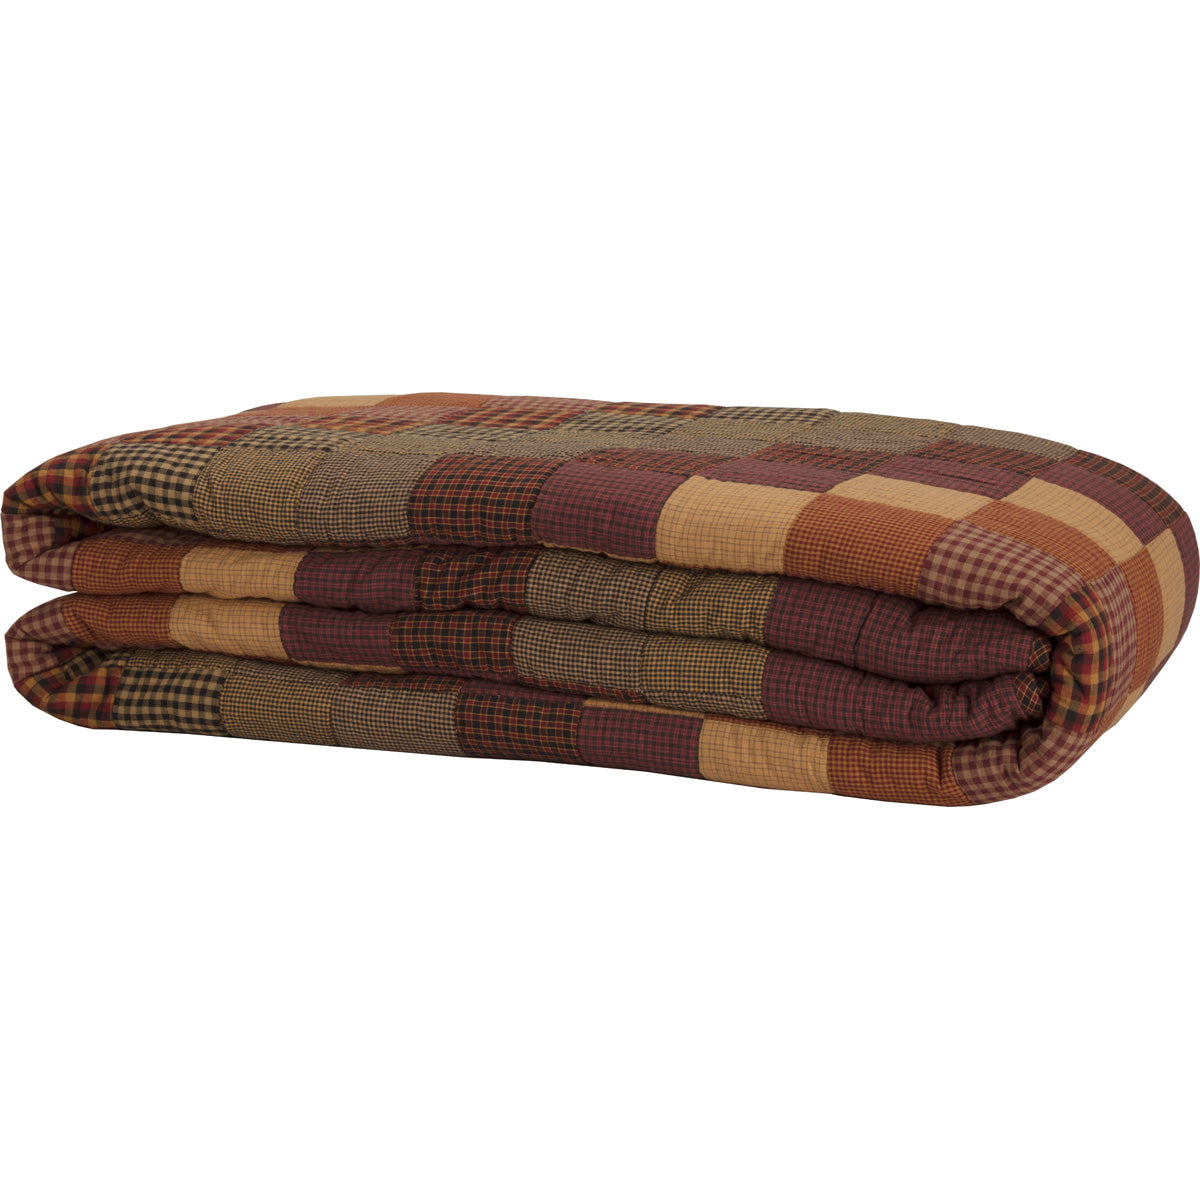 45603-Heritage-Farms-California-King-Quilt-130Wx115L-image-5